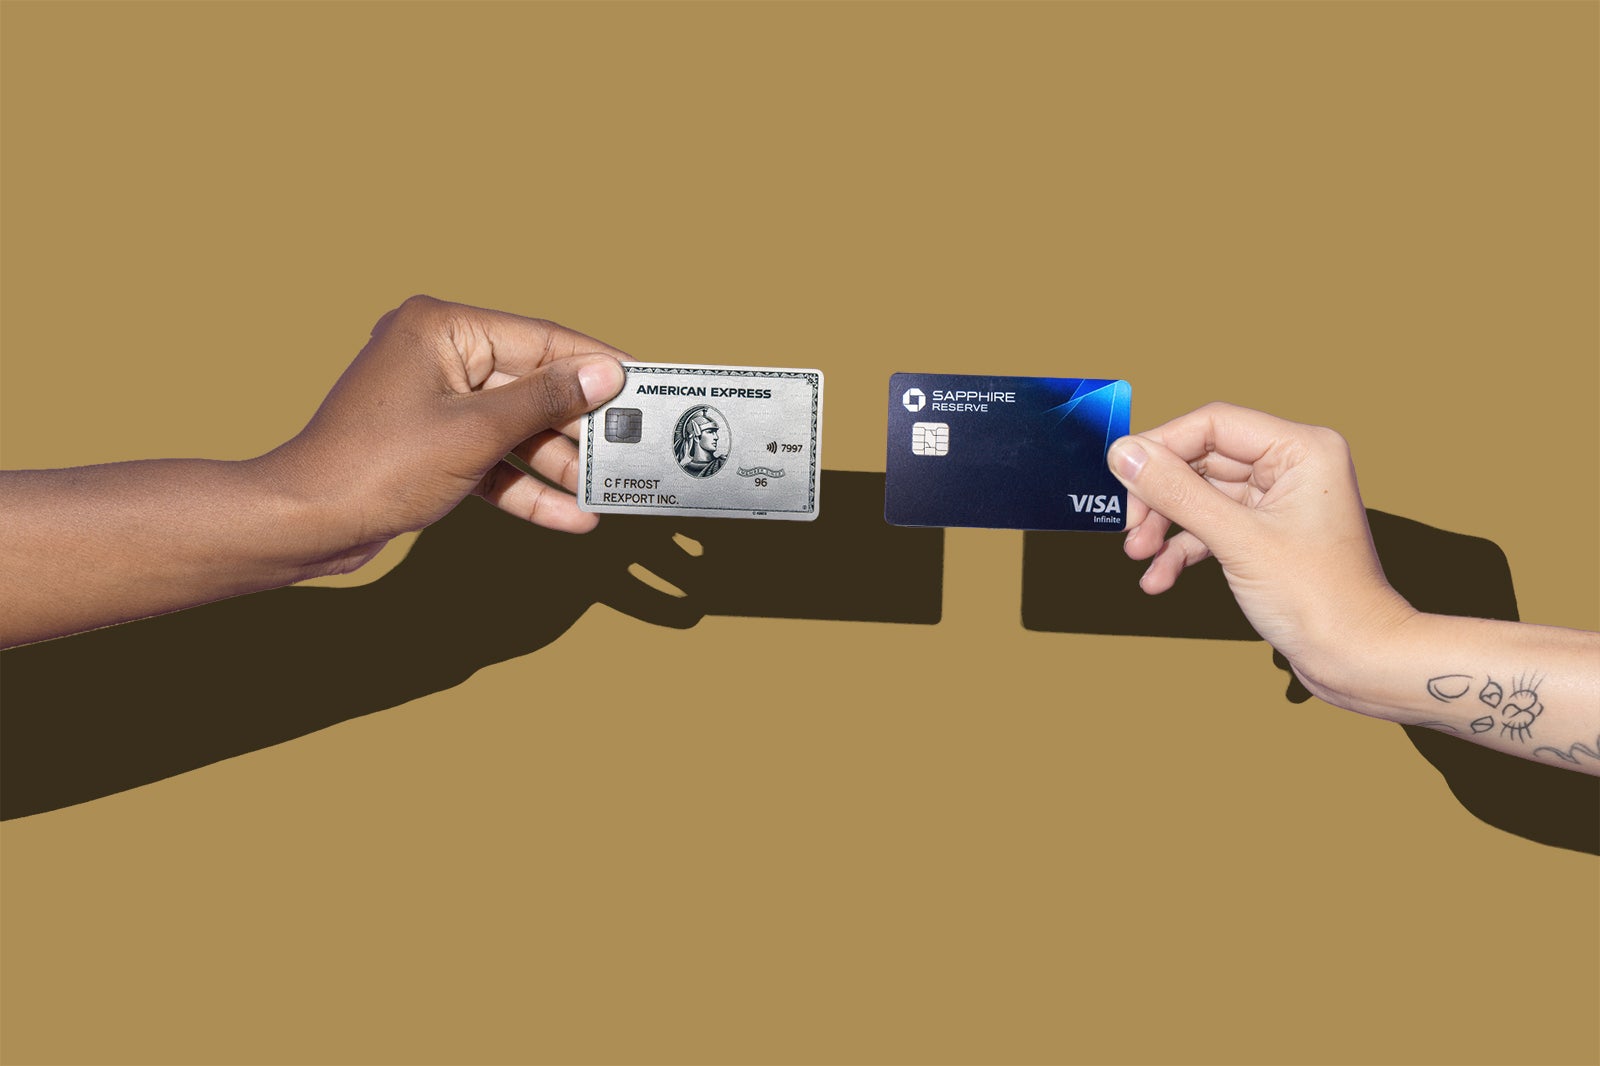 Hands holding credit cards